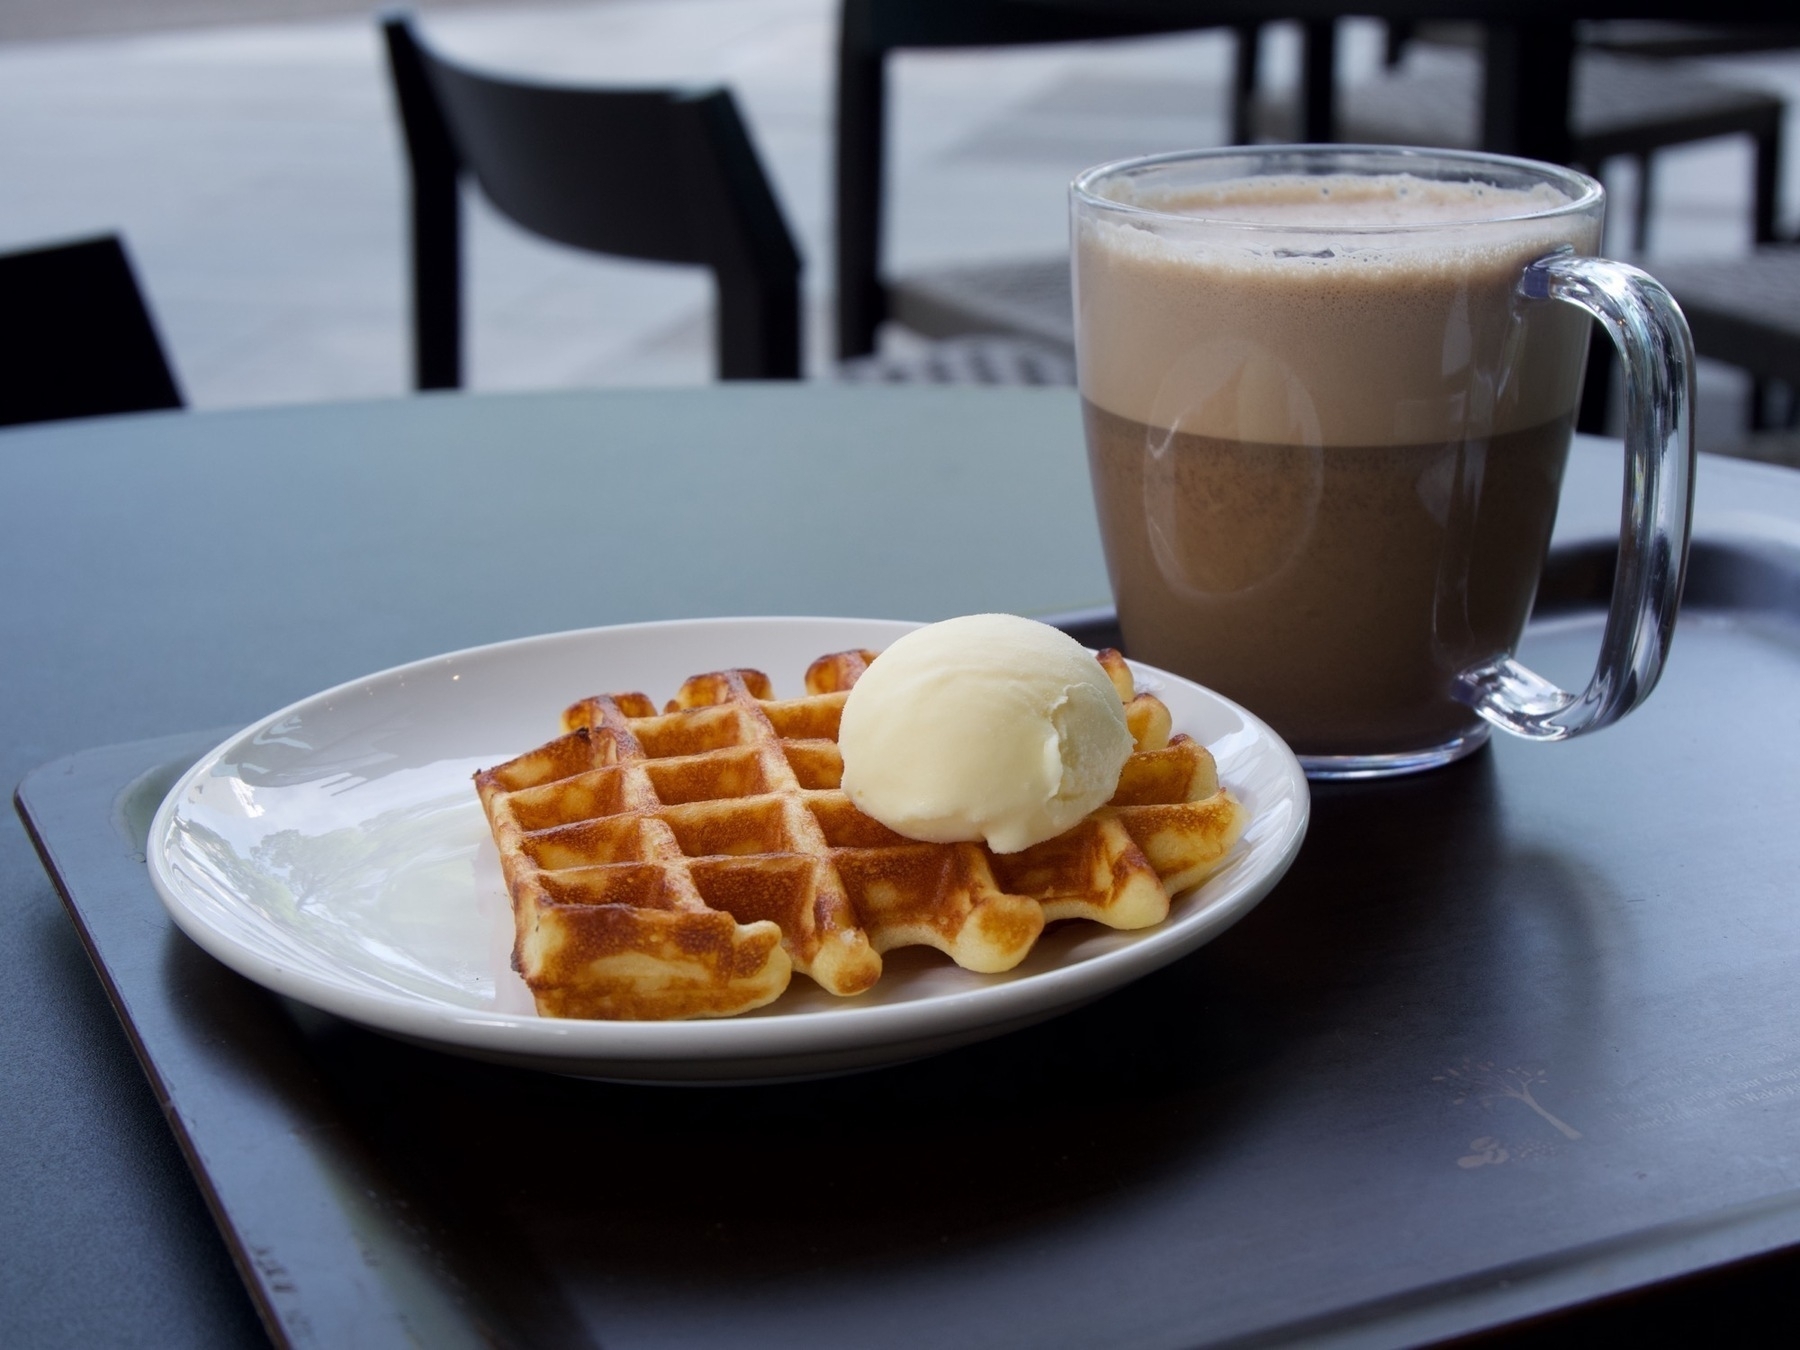 A glass mug of tea latte and a plate with a waffle. On top of the waffle is a scoop of ice cream